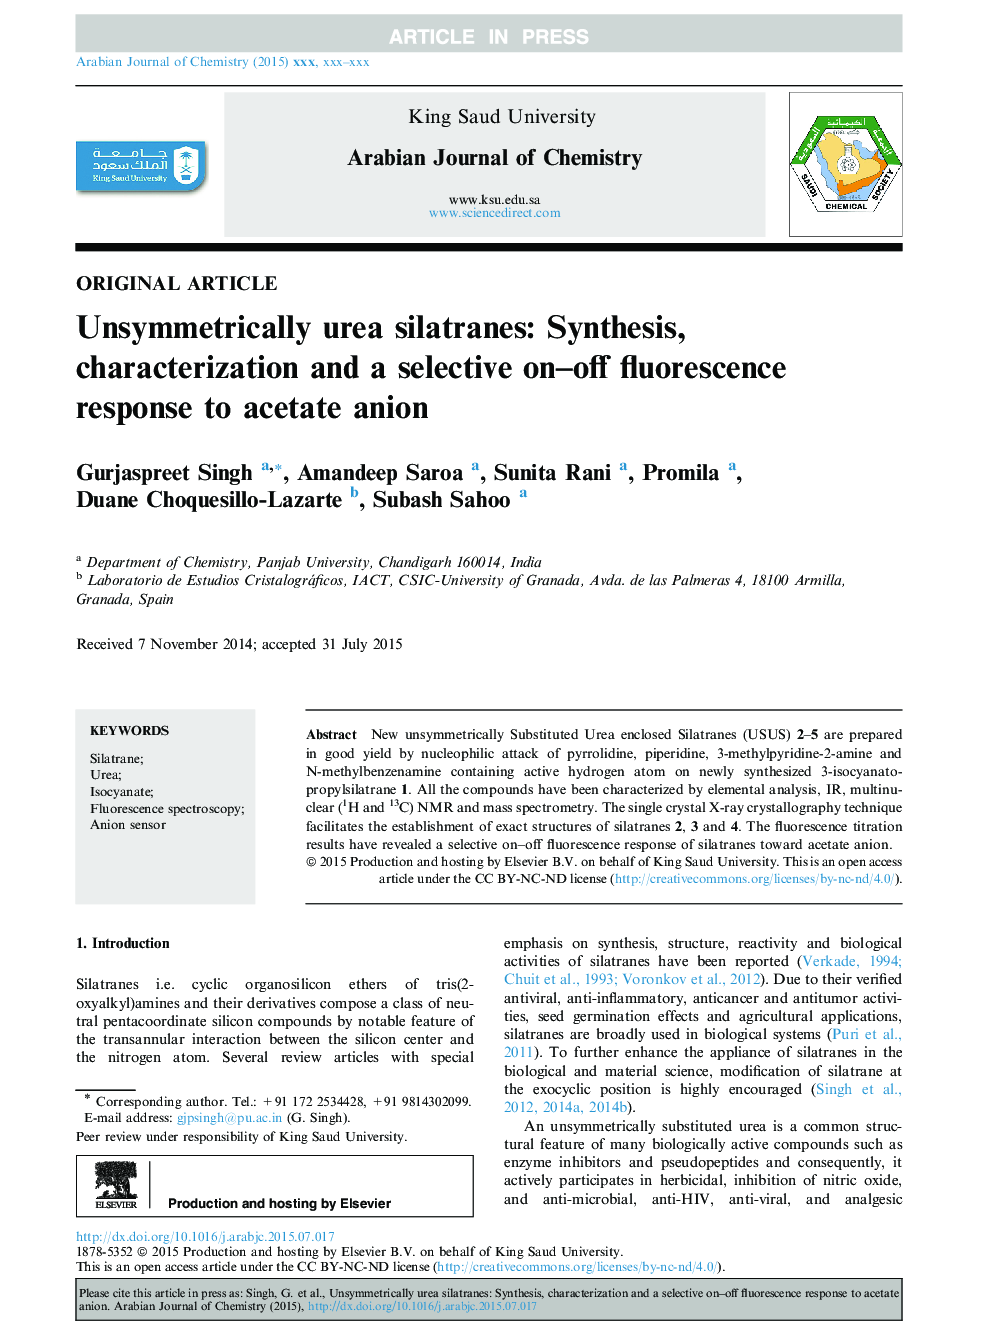 Unsymmetrically urea silatranes: Synthesis, characterization and a selective on-off fluorescence response to acetate anion